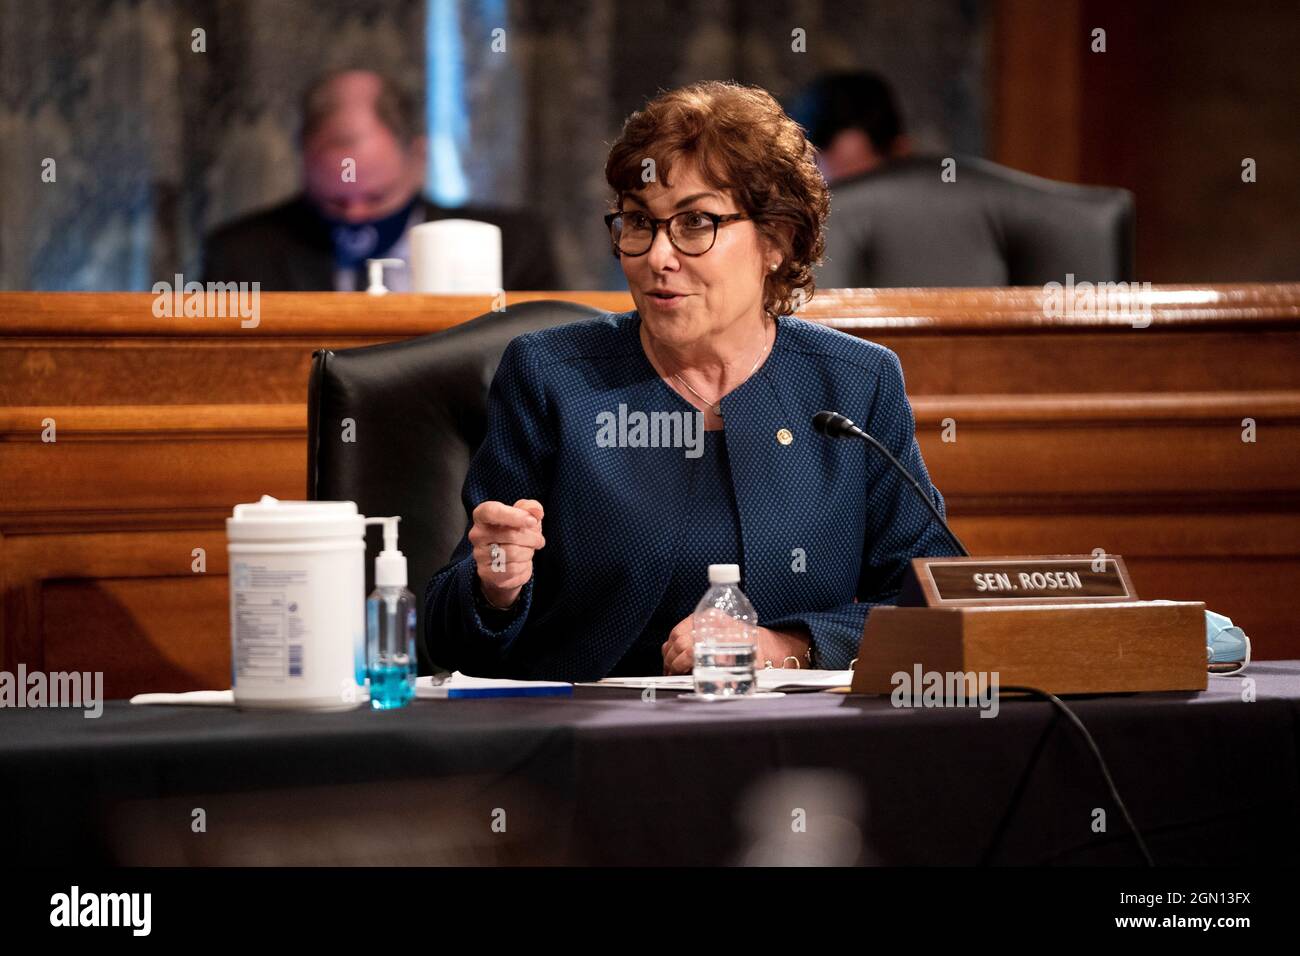 United States Senator Jacky Rosen (Democrat of Nevada) during a Senate Homeland Security & Governmental Affairs Committee hearing to discuss security threats 20 years after the 9/11 terrorist attacks on Tuesday, September 21, 2021 at the U.S. Capitol in Washington, DC Credit: Greg Nash/Pool via CNP Stock Photo